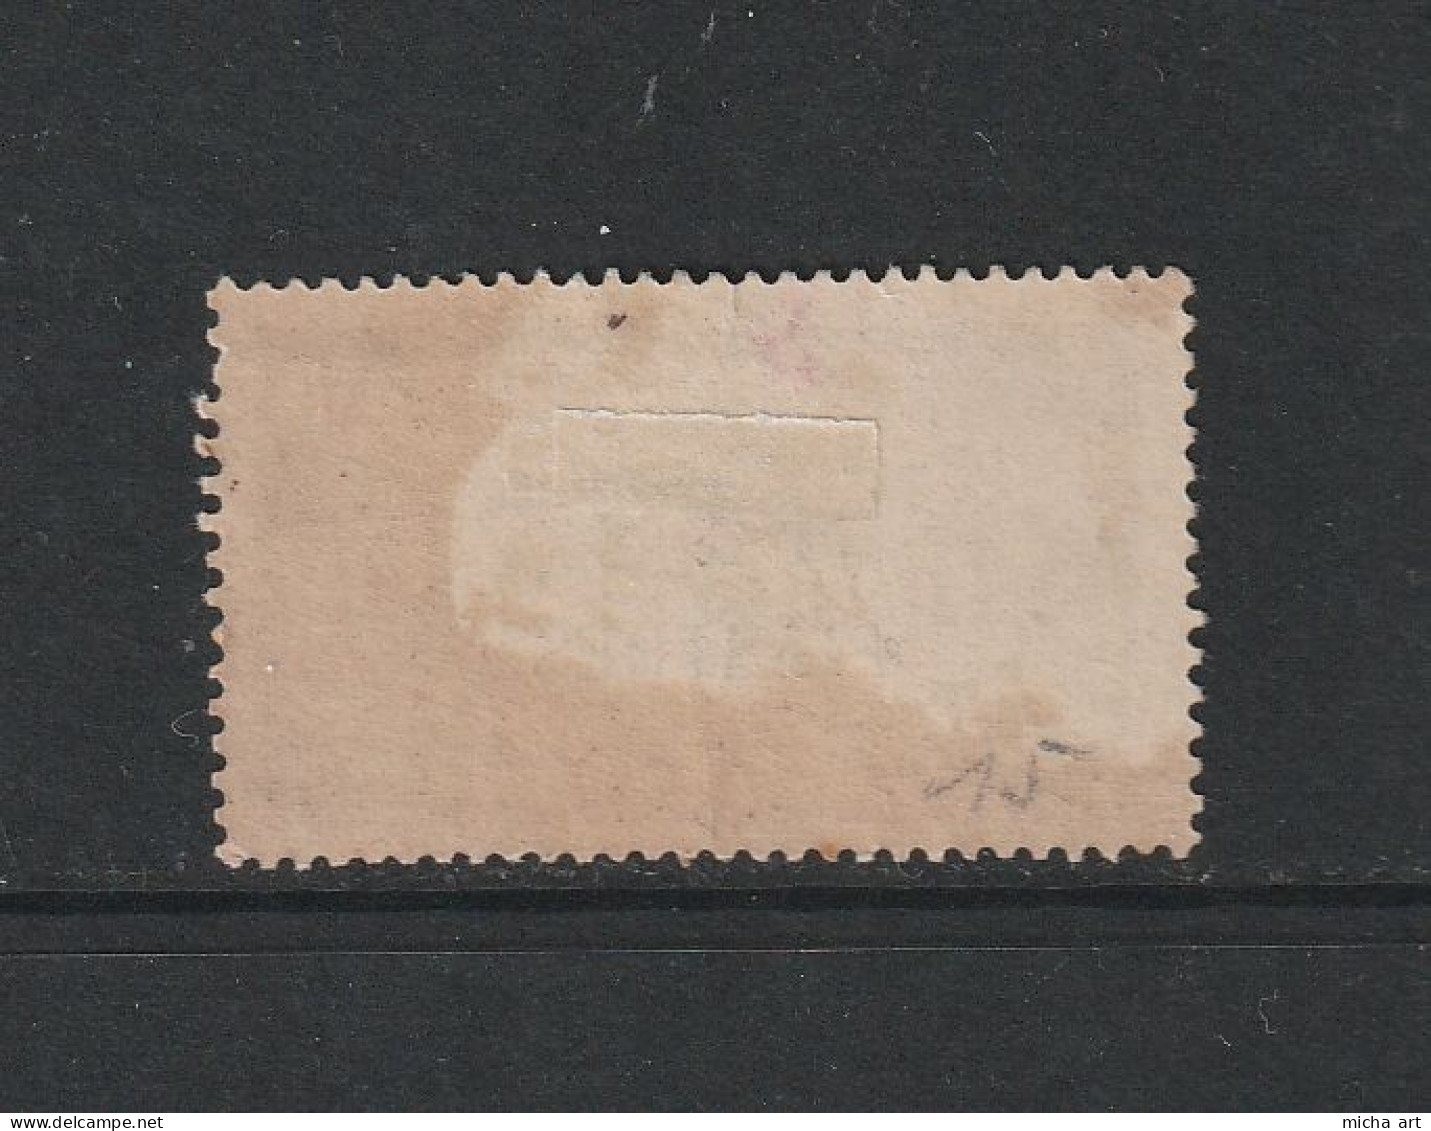 Greece French Post Office 1902 - 1913 Dedeagh Issue 4 Pi / 1 F. MH W1100 - Unused Stamps